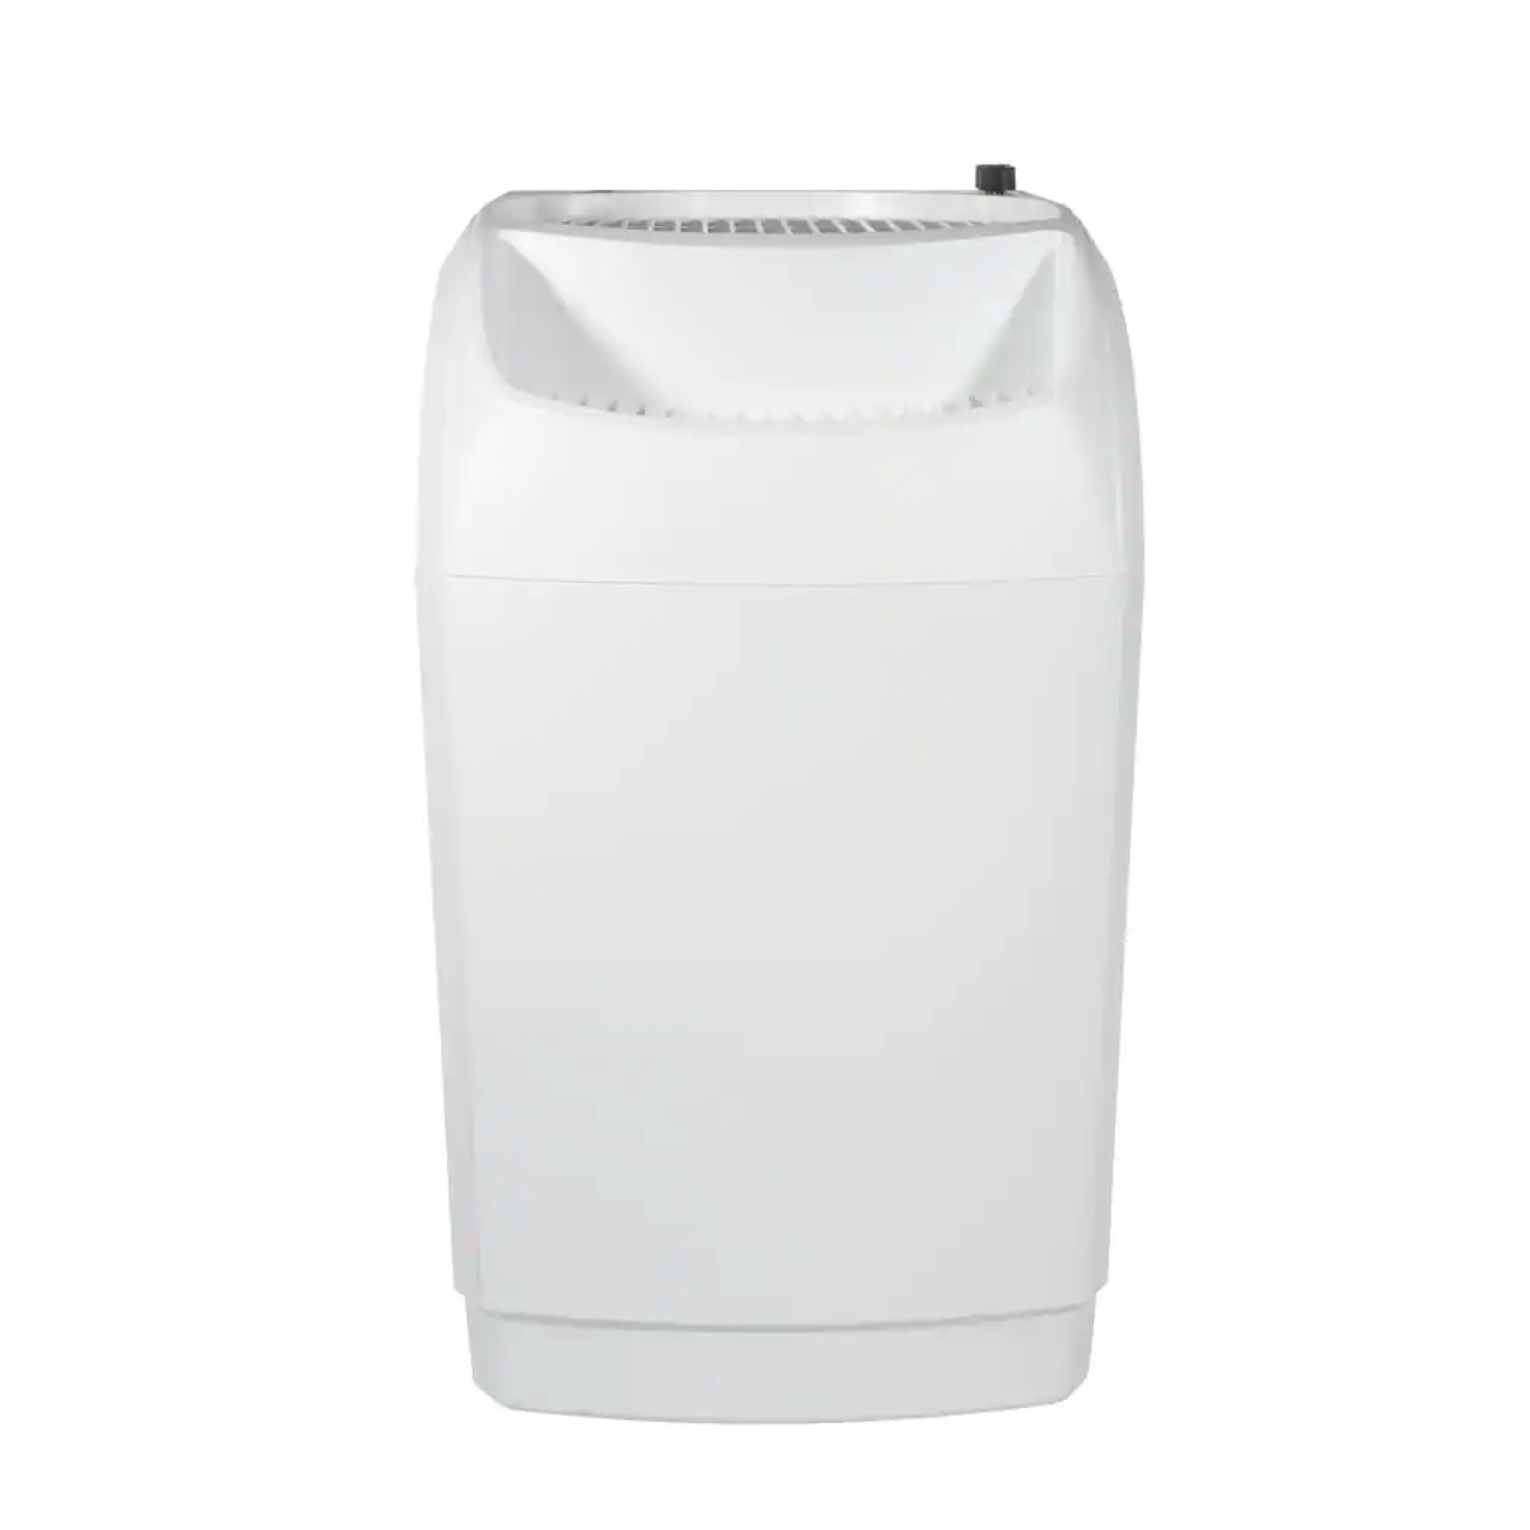 Aircare 836000HB 6 Gal. Evaporative Humidifier for 2300 Sq. Ft.